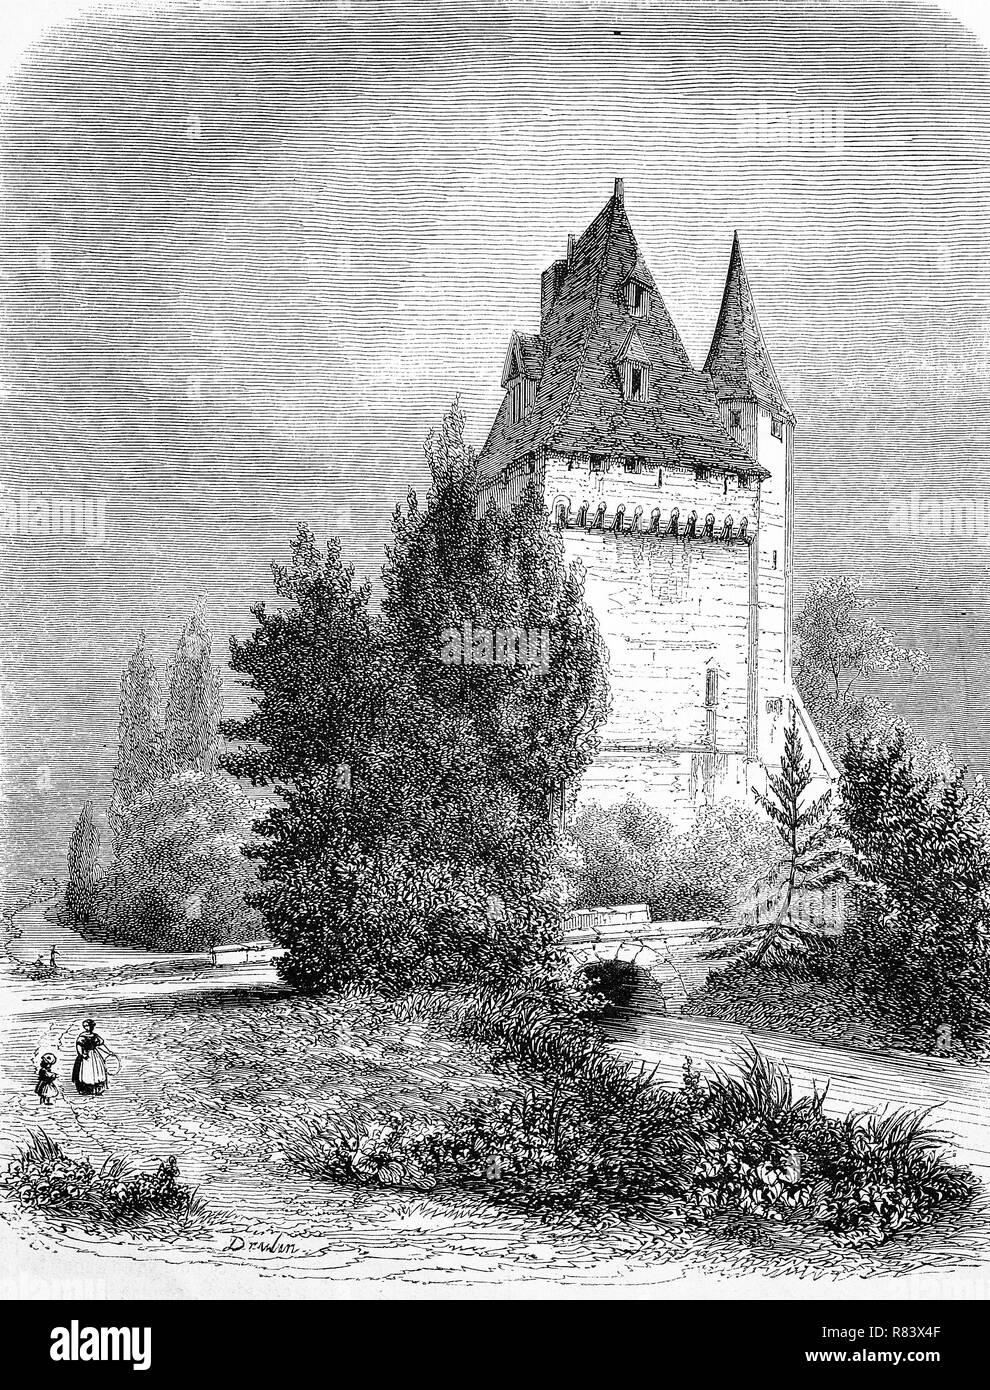 Digital improved reproduction, keep, kype, a type of fortified tower, Donjon, France, Wohnturm der früheren Burg von Saintines, Hauts-de-France, Frankreich, from an original print from the year 1855 Stock Photo